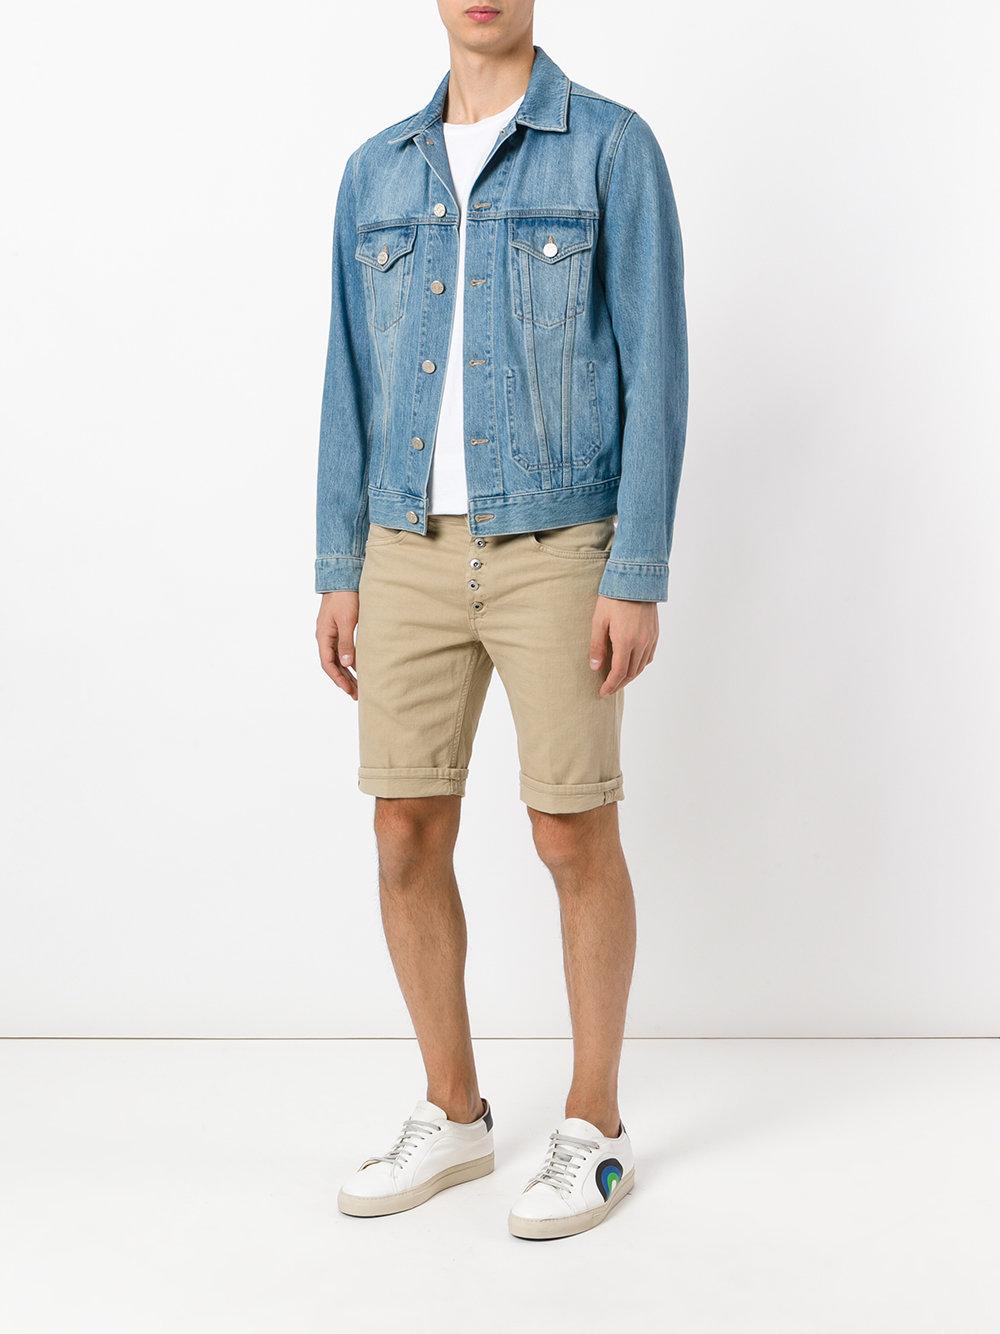 Lyst - Dondup Buttoned Shorts in Natural for Men